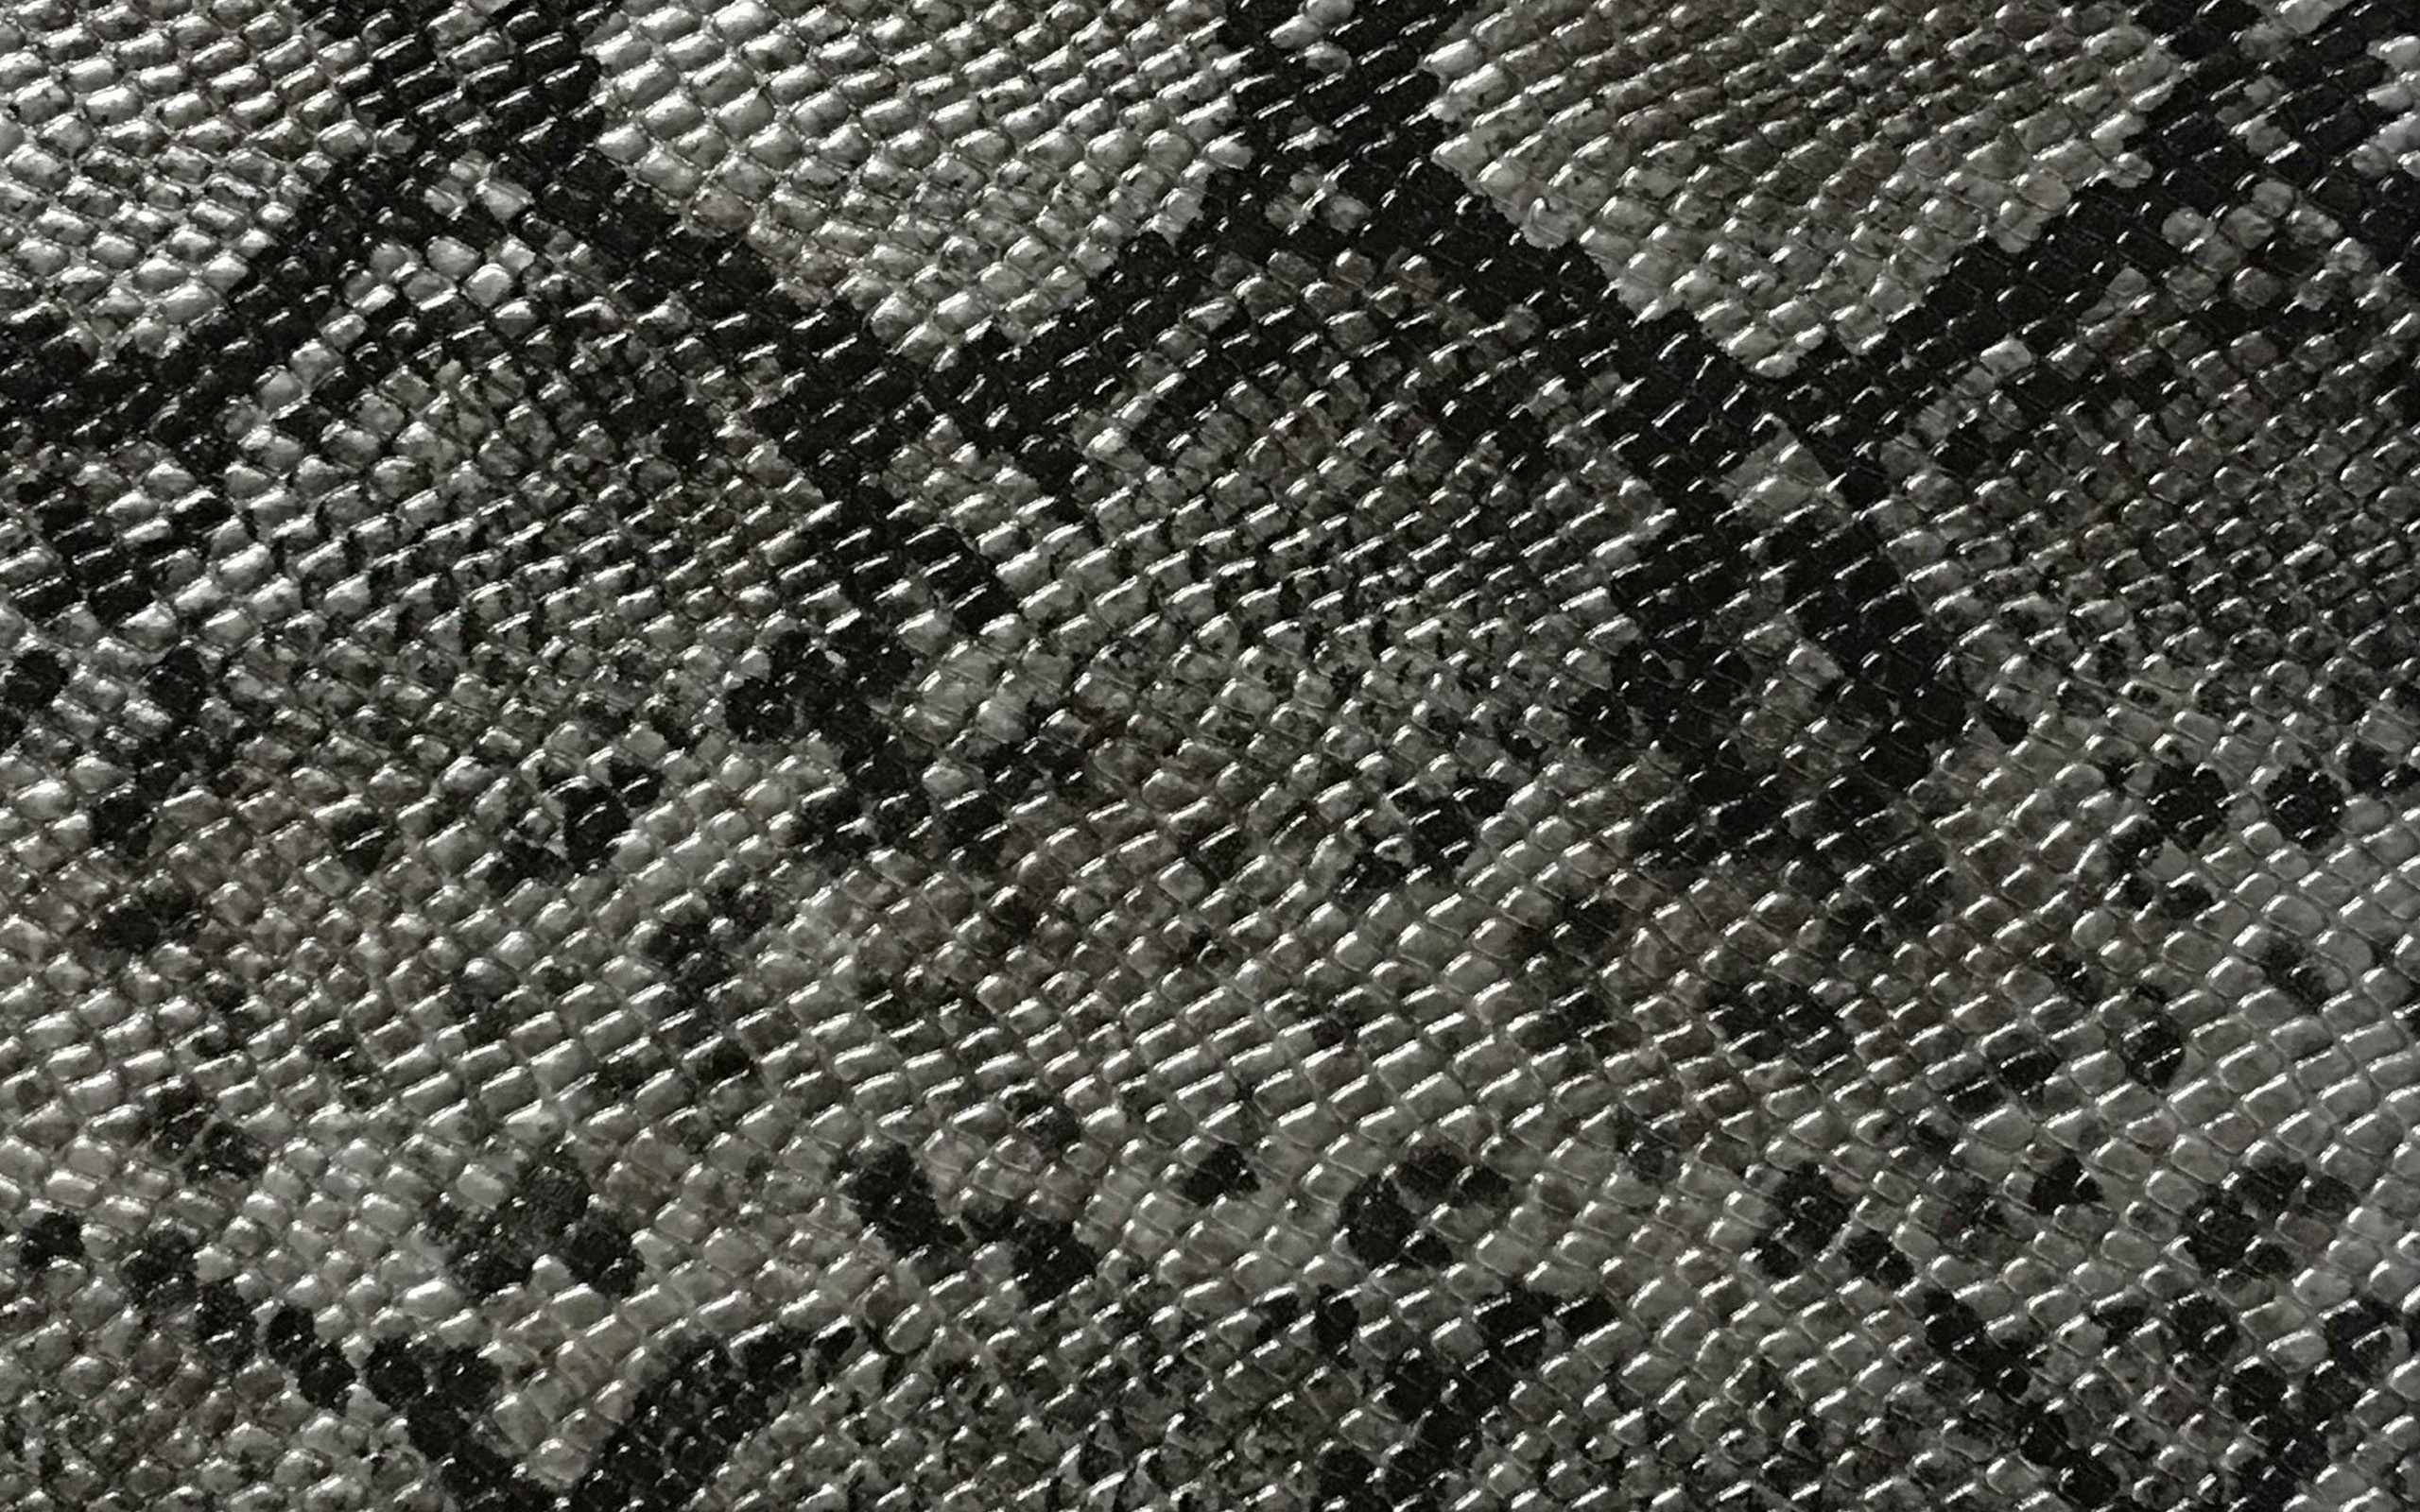 Download wallpaper gray snake skin texture, cobra skin texture, creative background, snake skin background for desktop with resolution 2560x1600. High Quality HD picture wallpaper